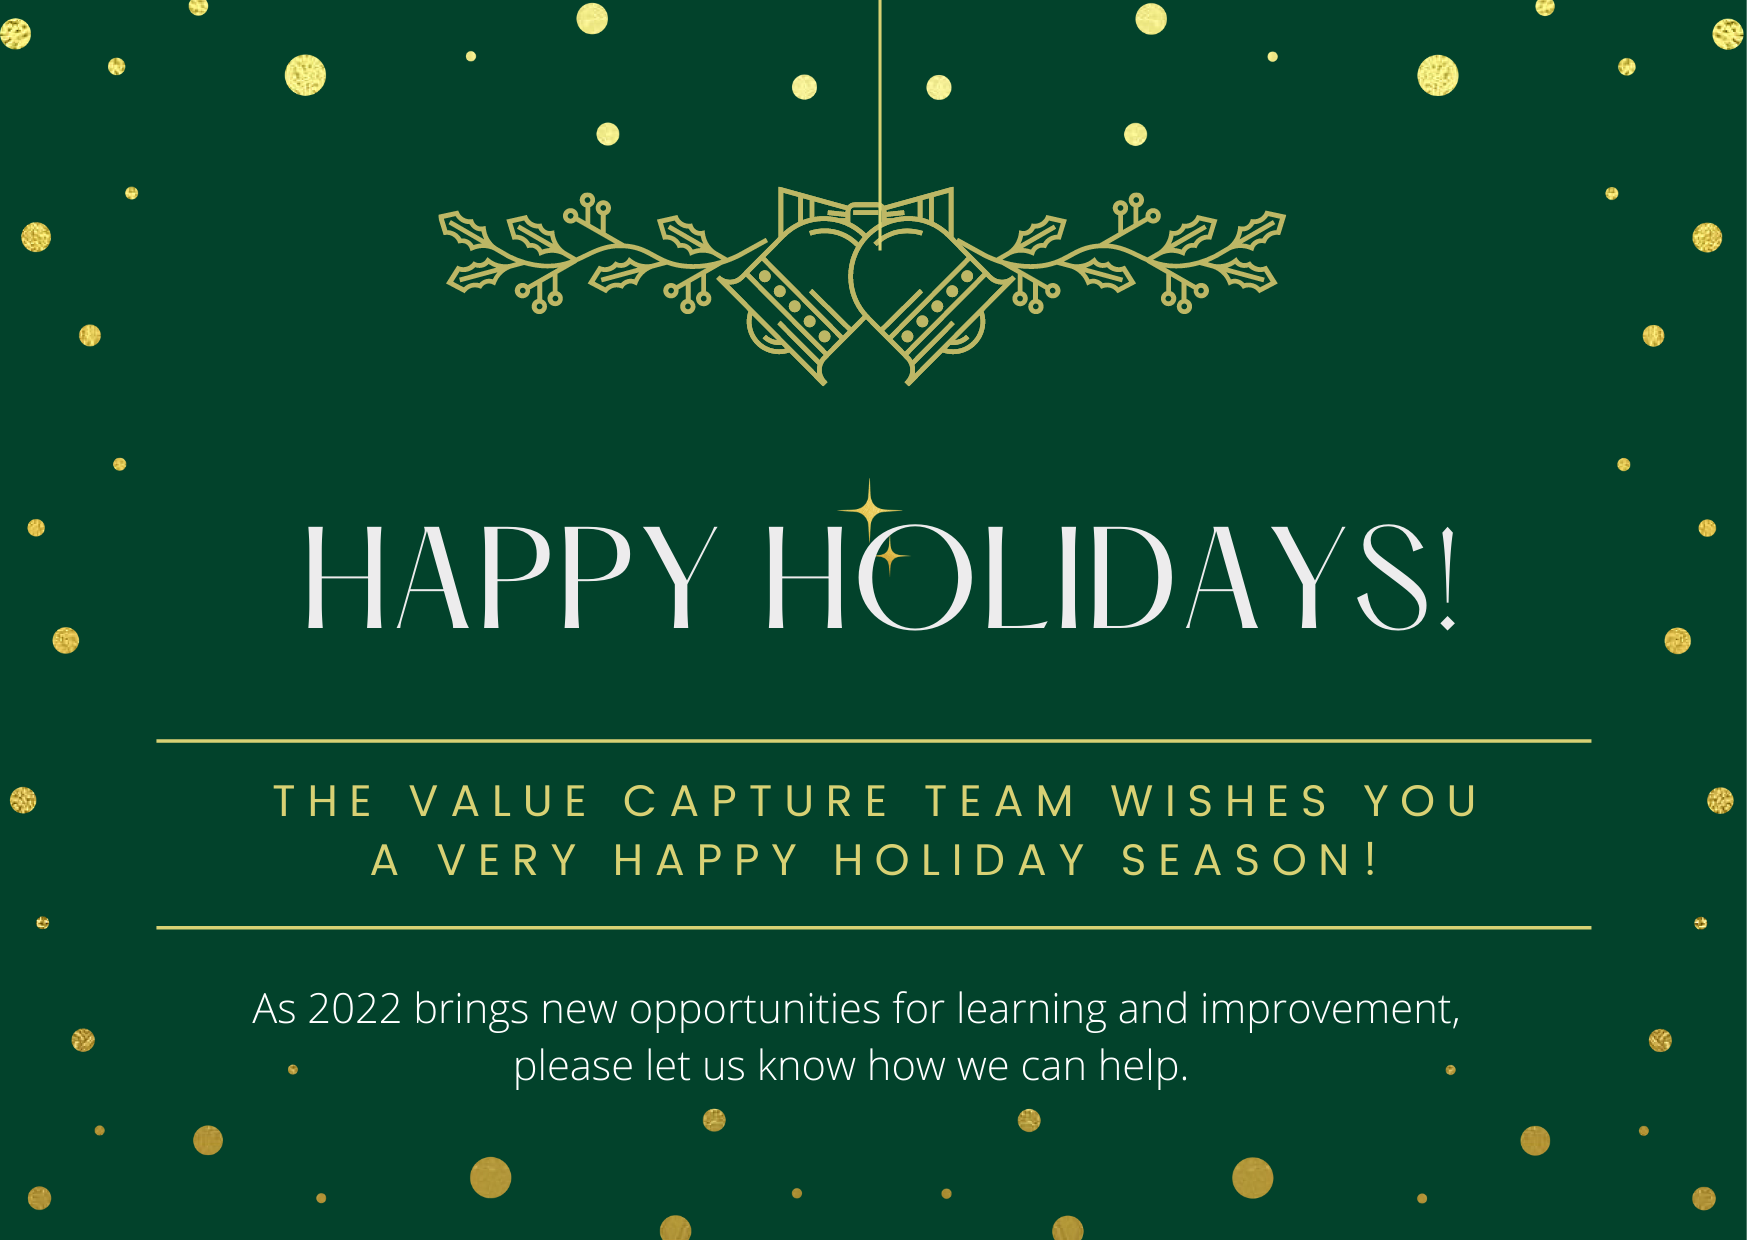 Happy Holidays from the Value Capture Team